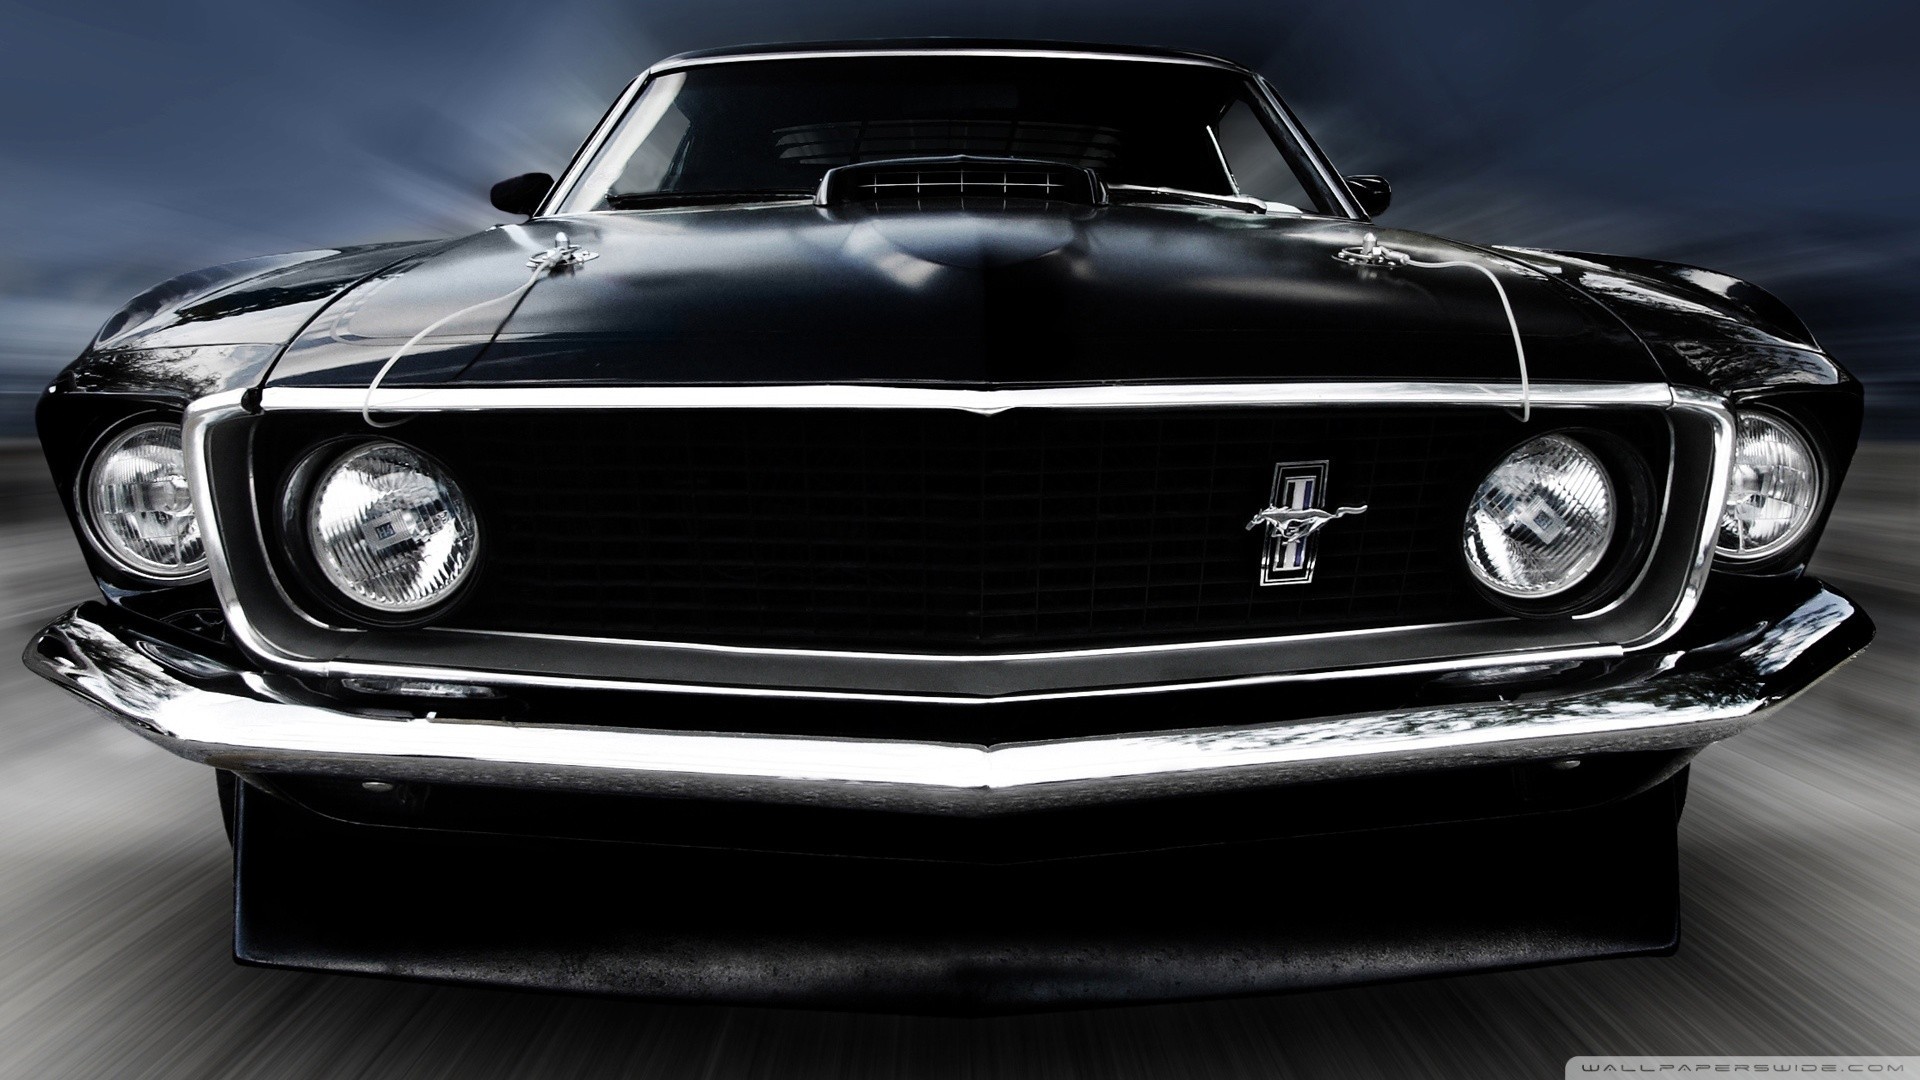 1920x1080 High Resolution American Muscle Car Background Wallpaper Full Size .